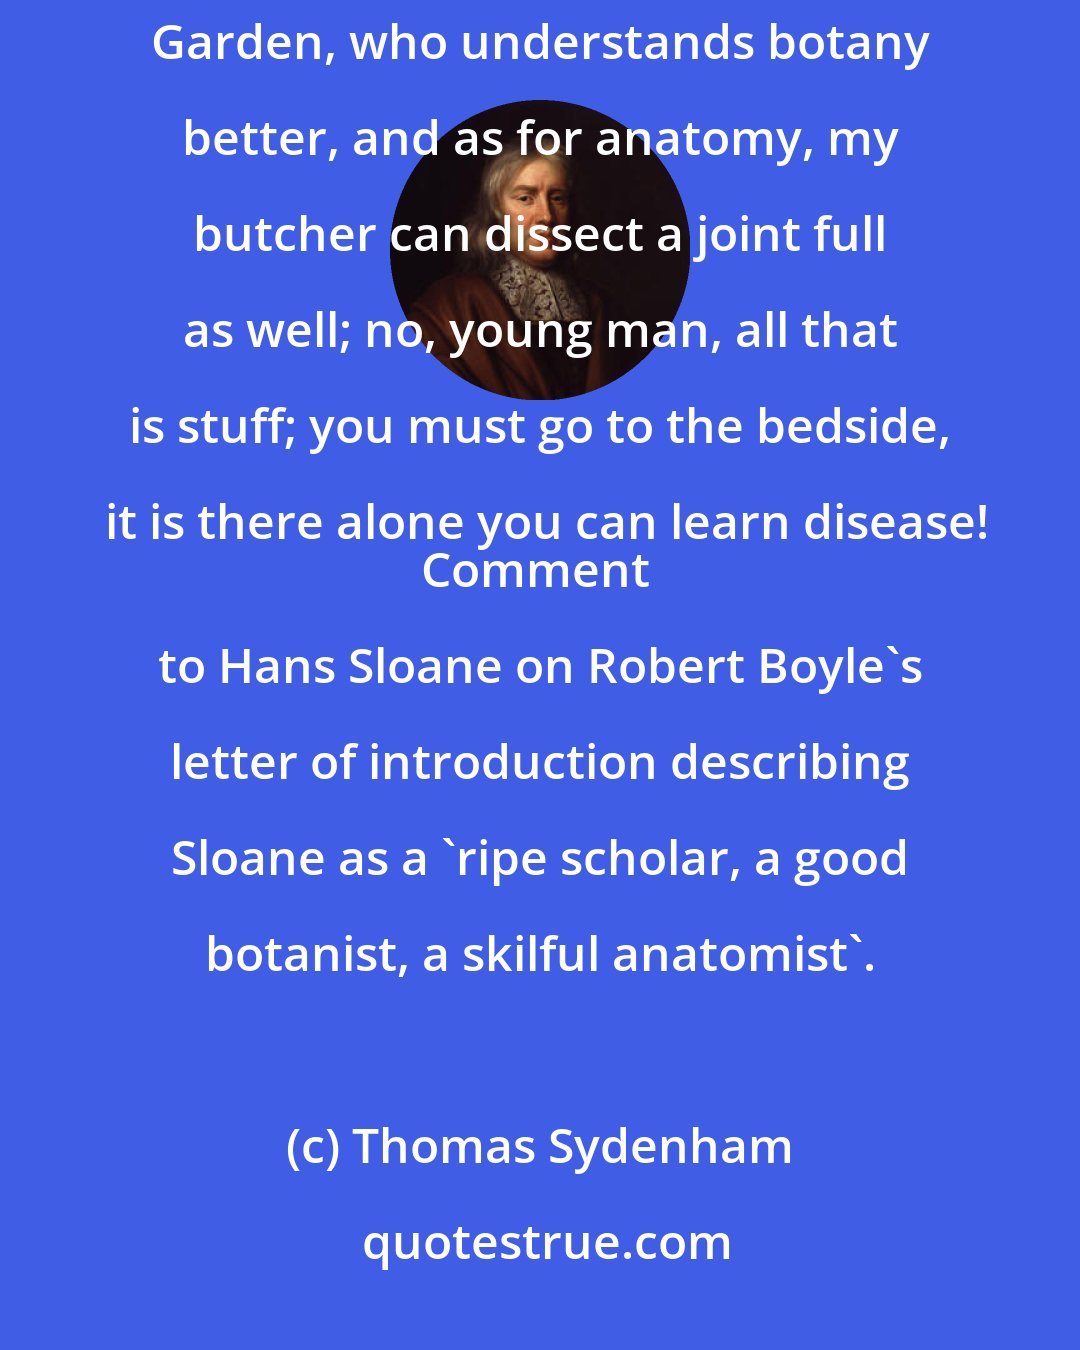 Thomas Sydenham: This is all very fine, but it won't do-Anatomy-botany-Nonsense! Sir, I know an old woman in Covent Garden, who understands botany better, and as for anatomy, my butcher can dissect a joint full as well; no, young man, all that is stuff; you must go to the bedside, it is there alone you can learn disease!
Comment to Hans Sloane on Robert Boyle's letter of introduction describing Sloane as a 'ripe scholar, a good botanist, a skilful anatomist'.